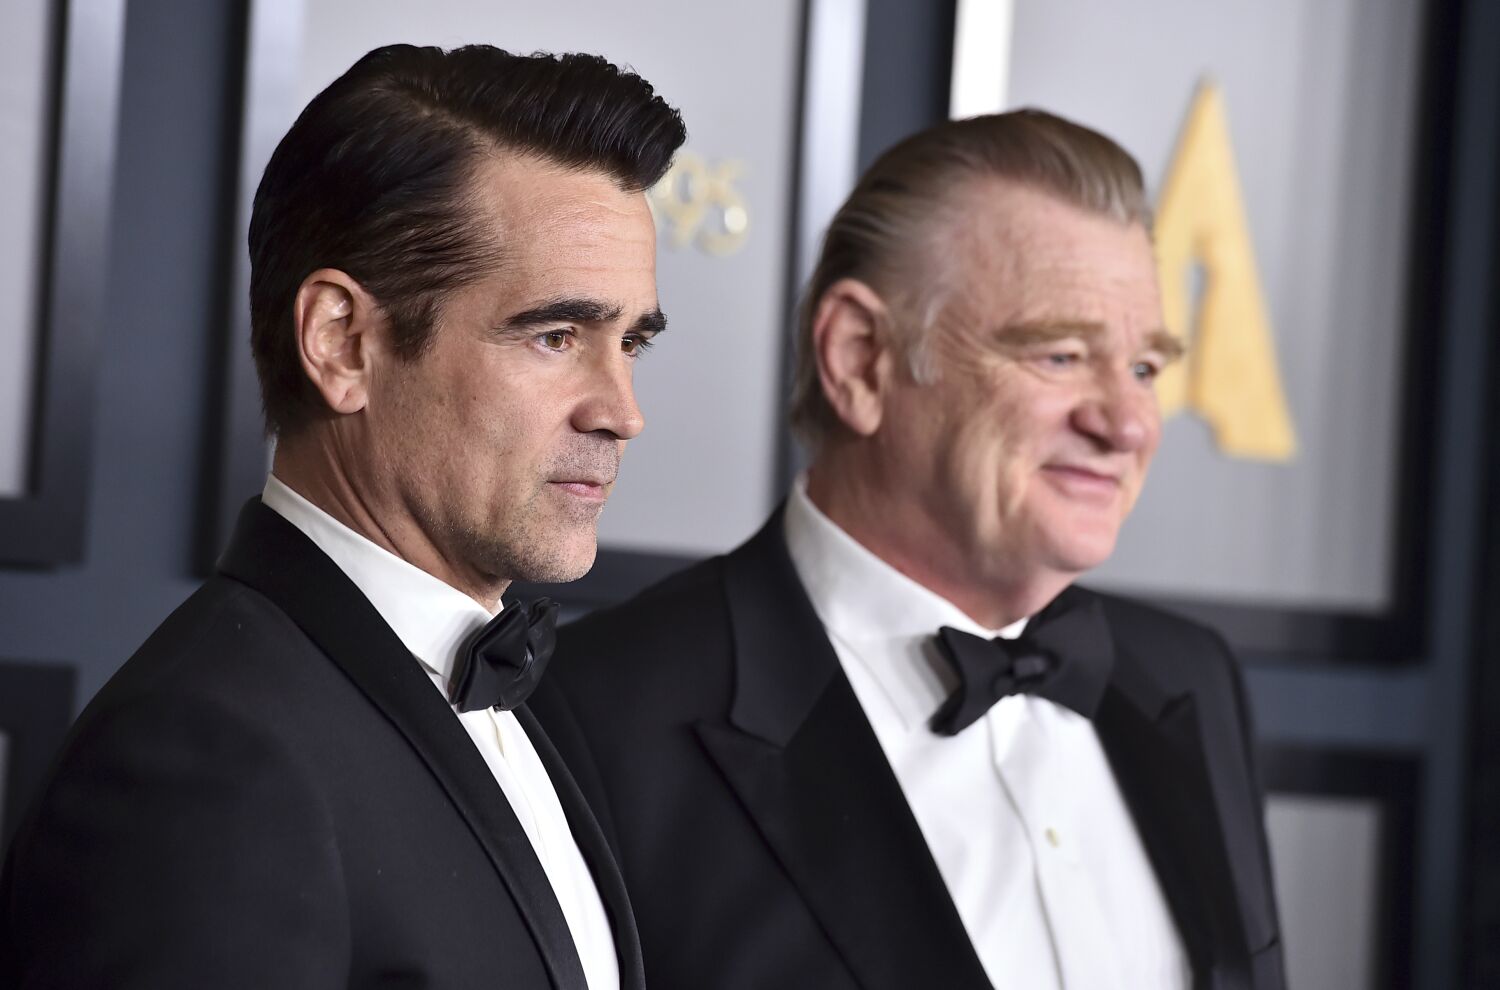 Colin Farrell and Brendan Gleeson bow out of awards show after contracting COVID-19